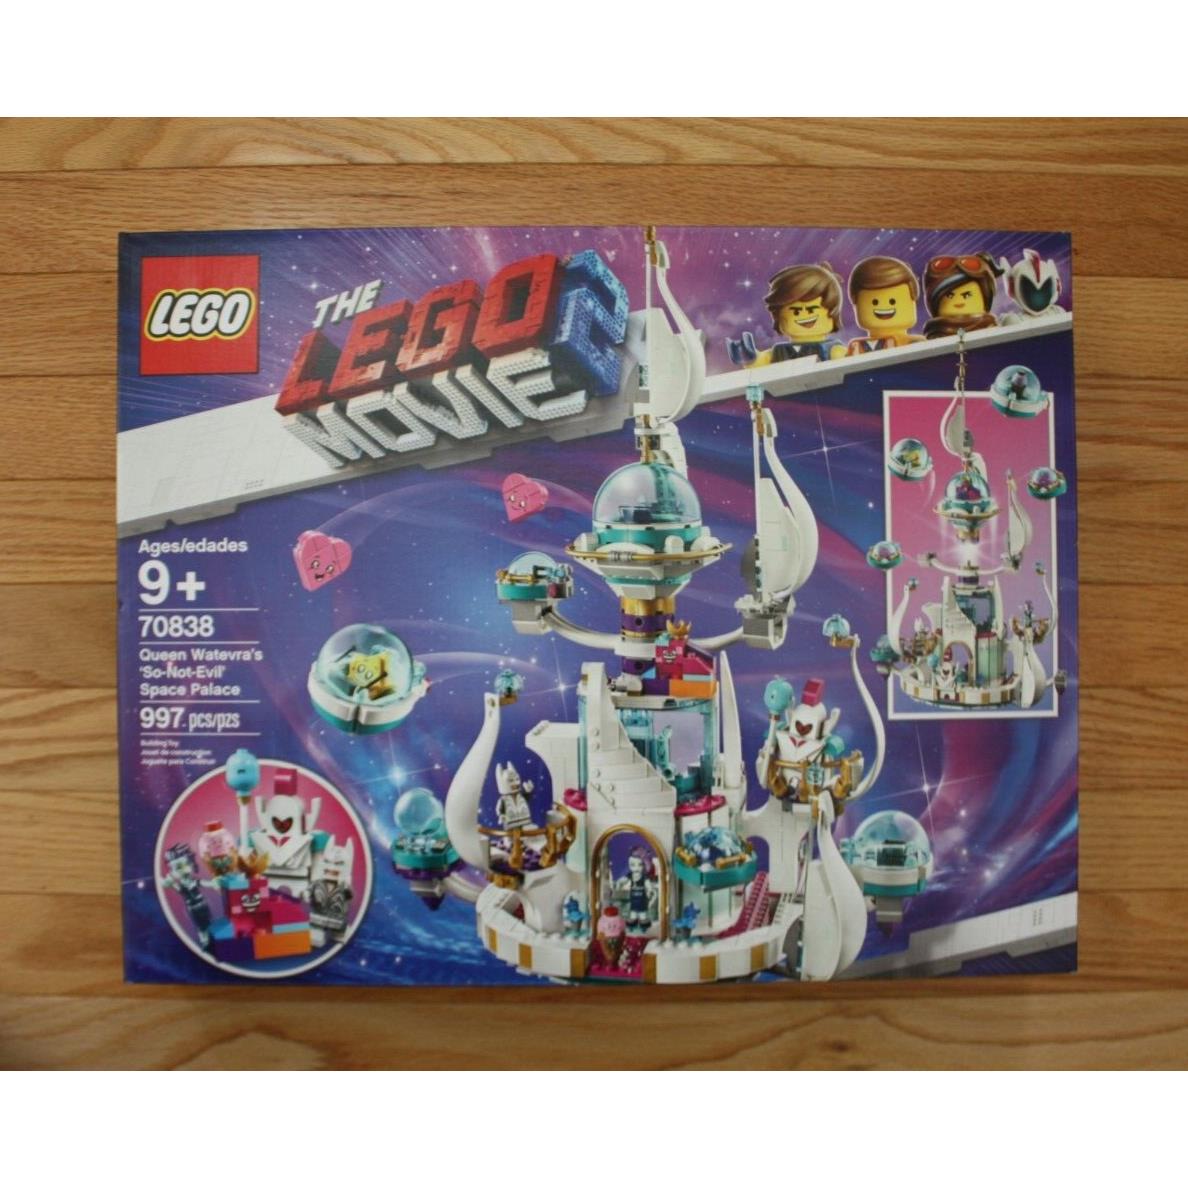 70838 The Lego Movie 2 Queen Watevra`s So-not-evil Space Palace